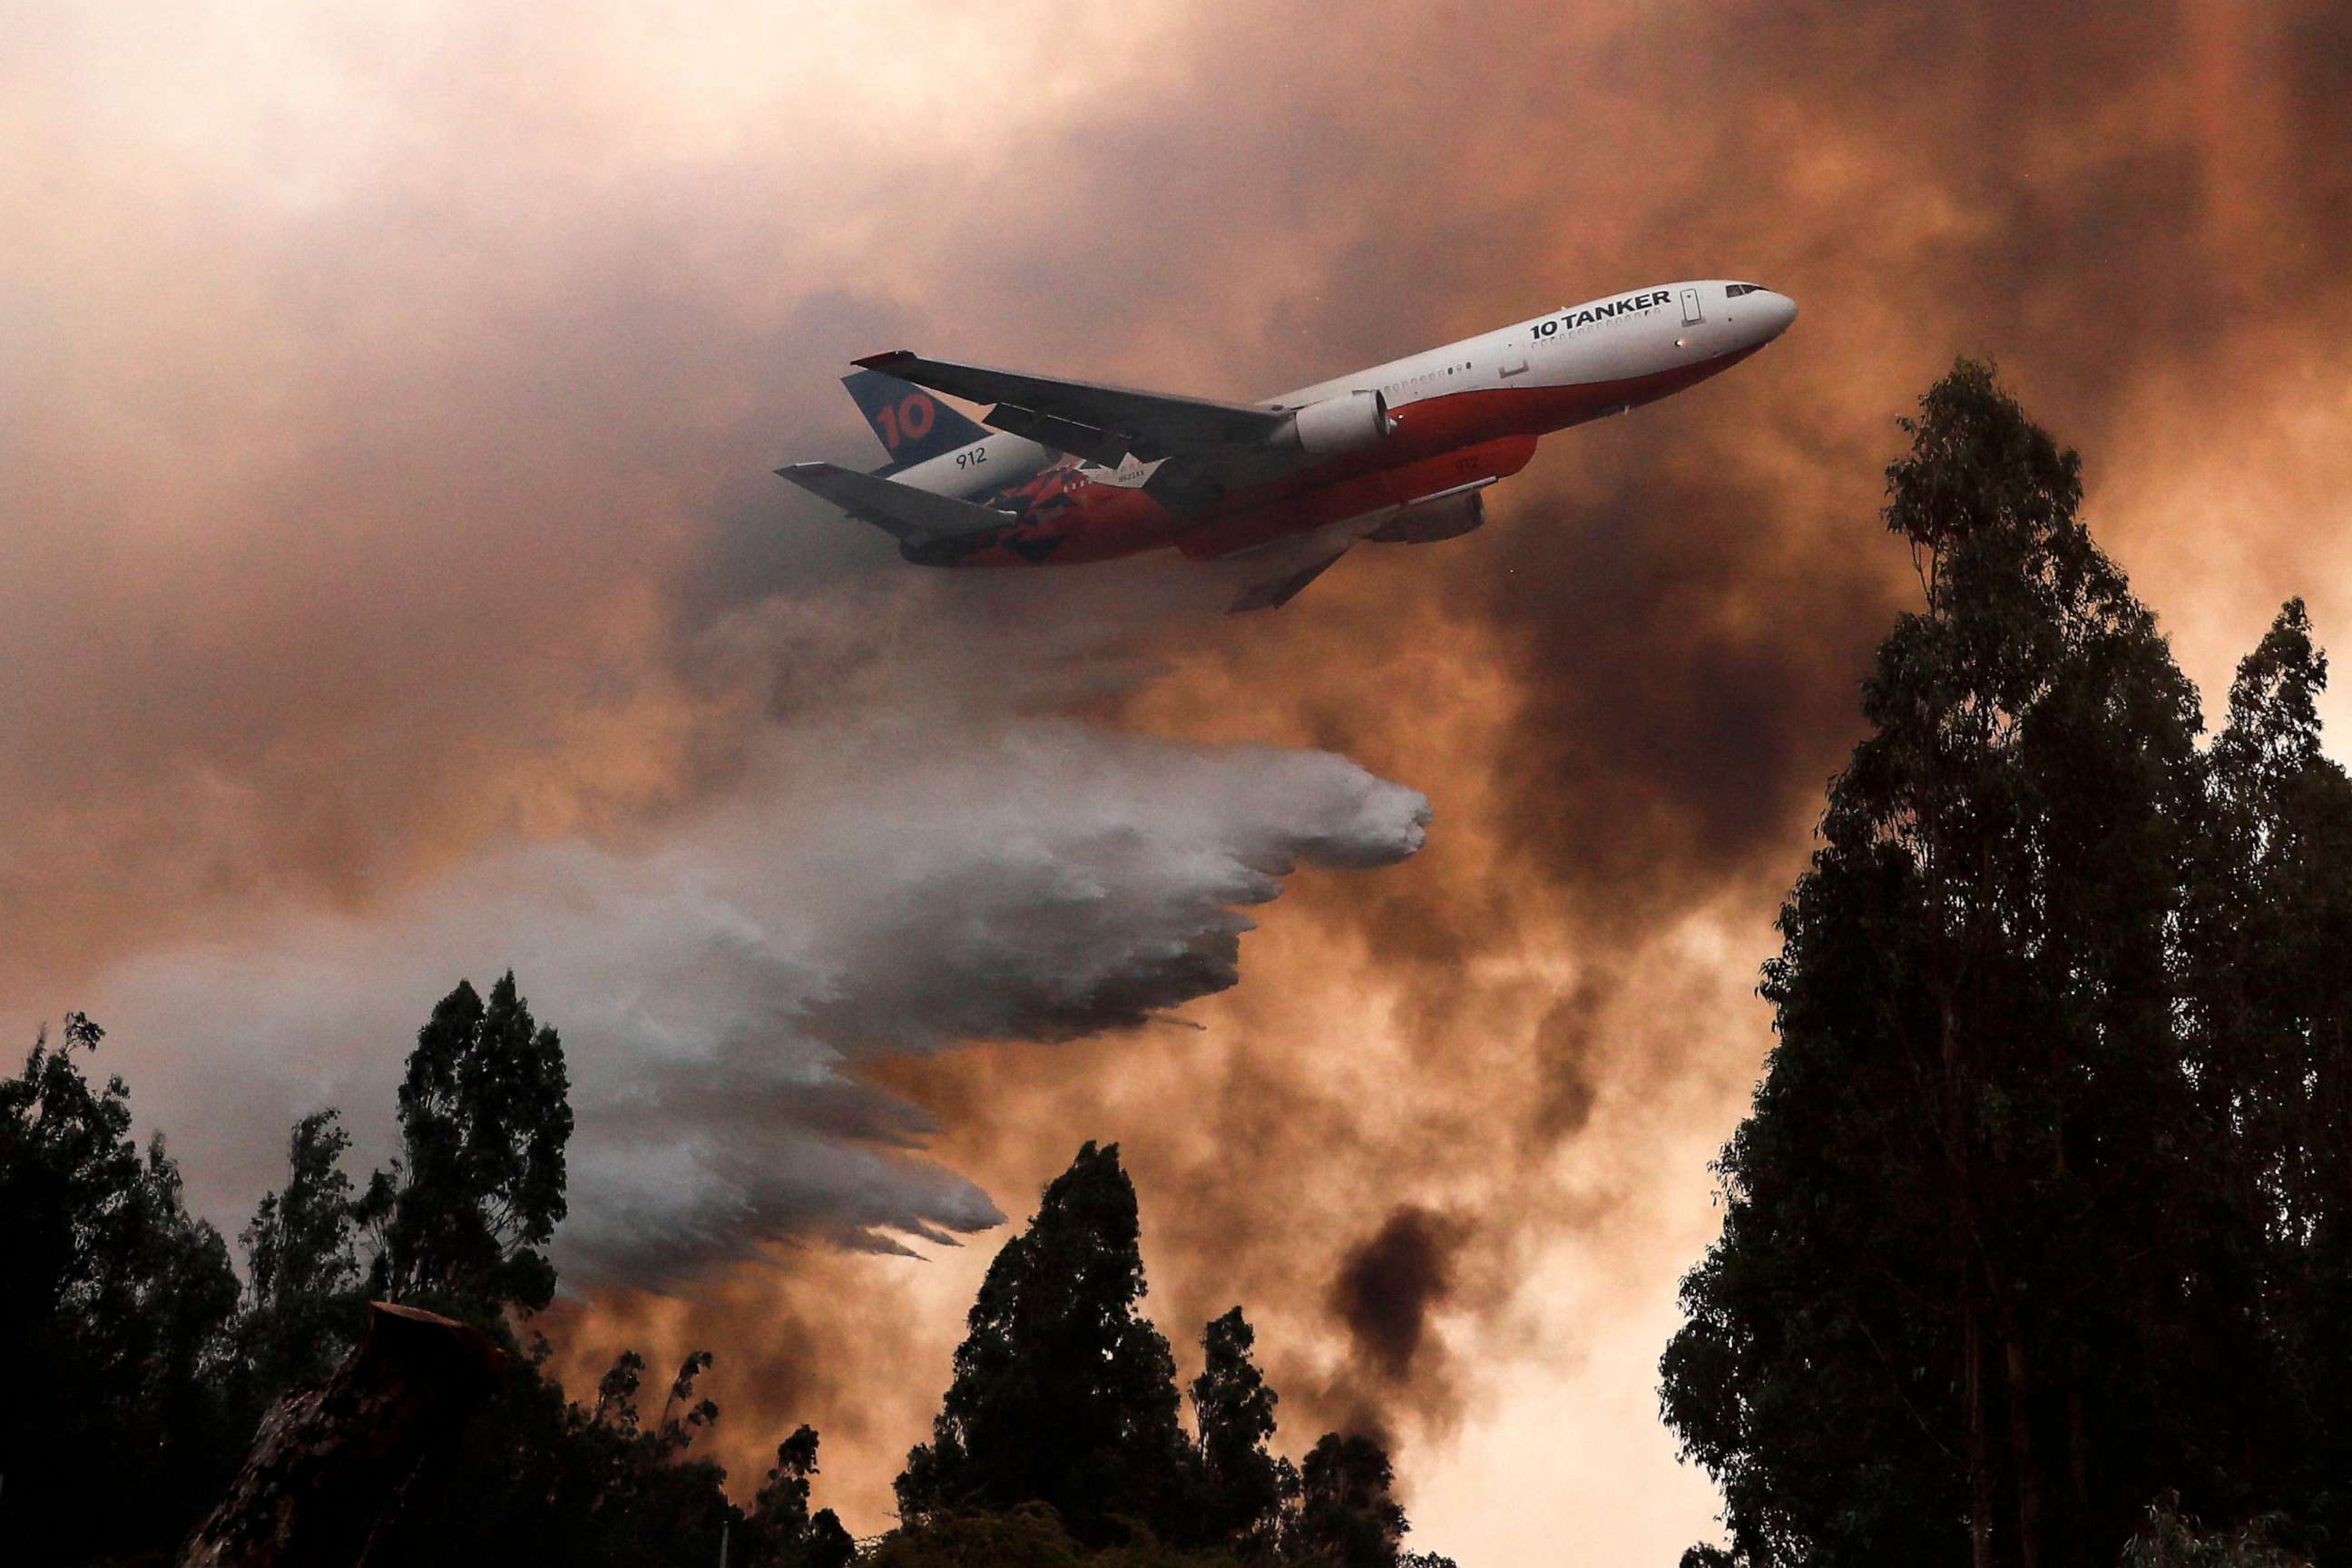 PHOTO: A 10 Tanker DC-10 fire plane throws water over a forest fire in Ninhue, Ãuble Region, in Chile, on February 10, 2023. - Forest fires have raged for more than a week in south-central Chile, leaving at least 24 people dead.